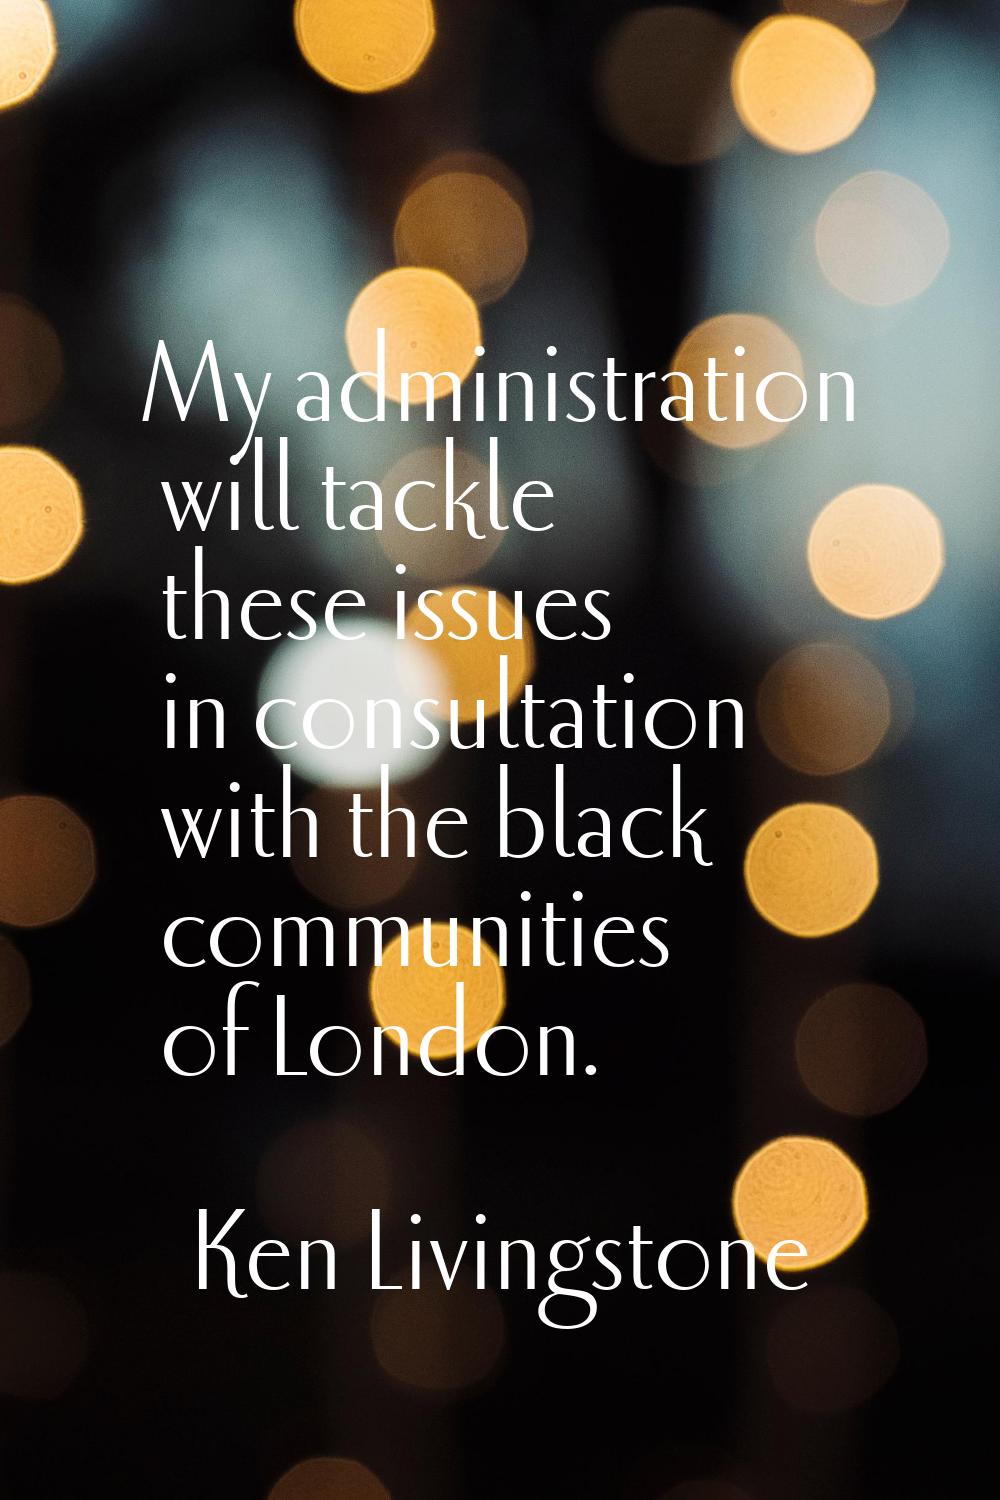 My administration will tackle these issues in consultation with the black communities of London.